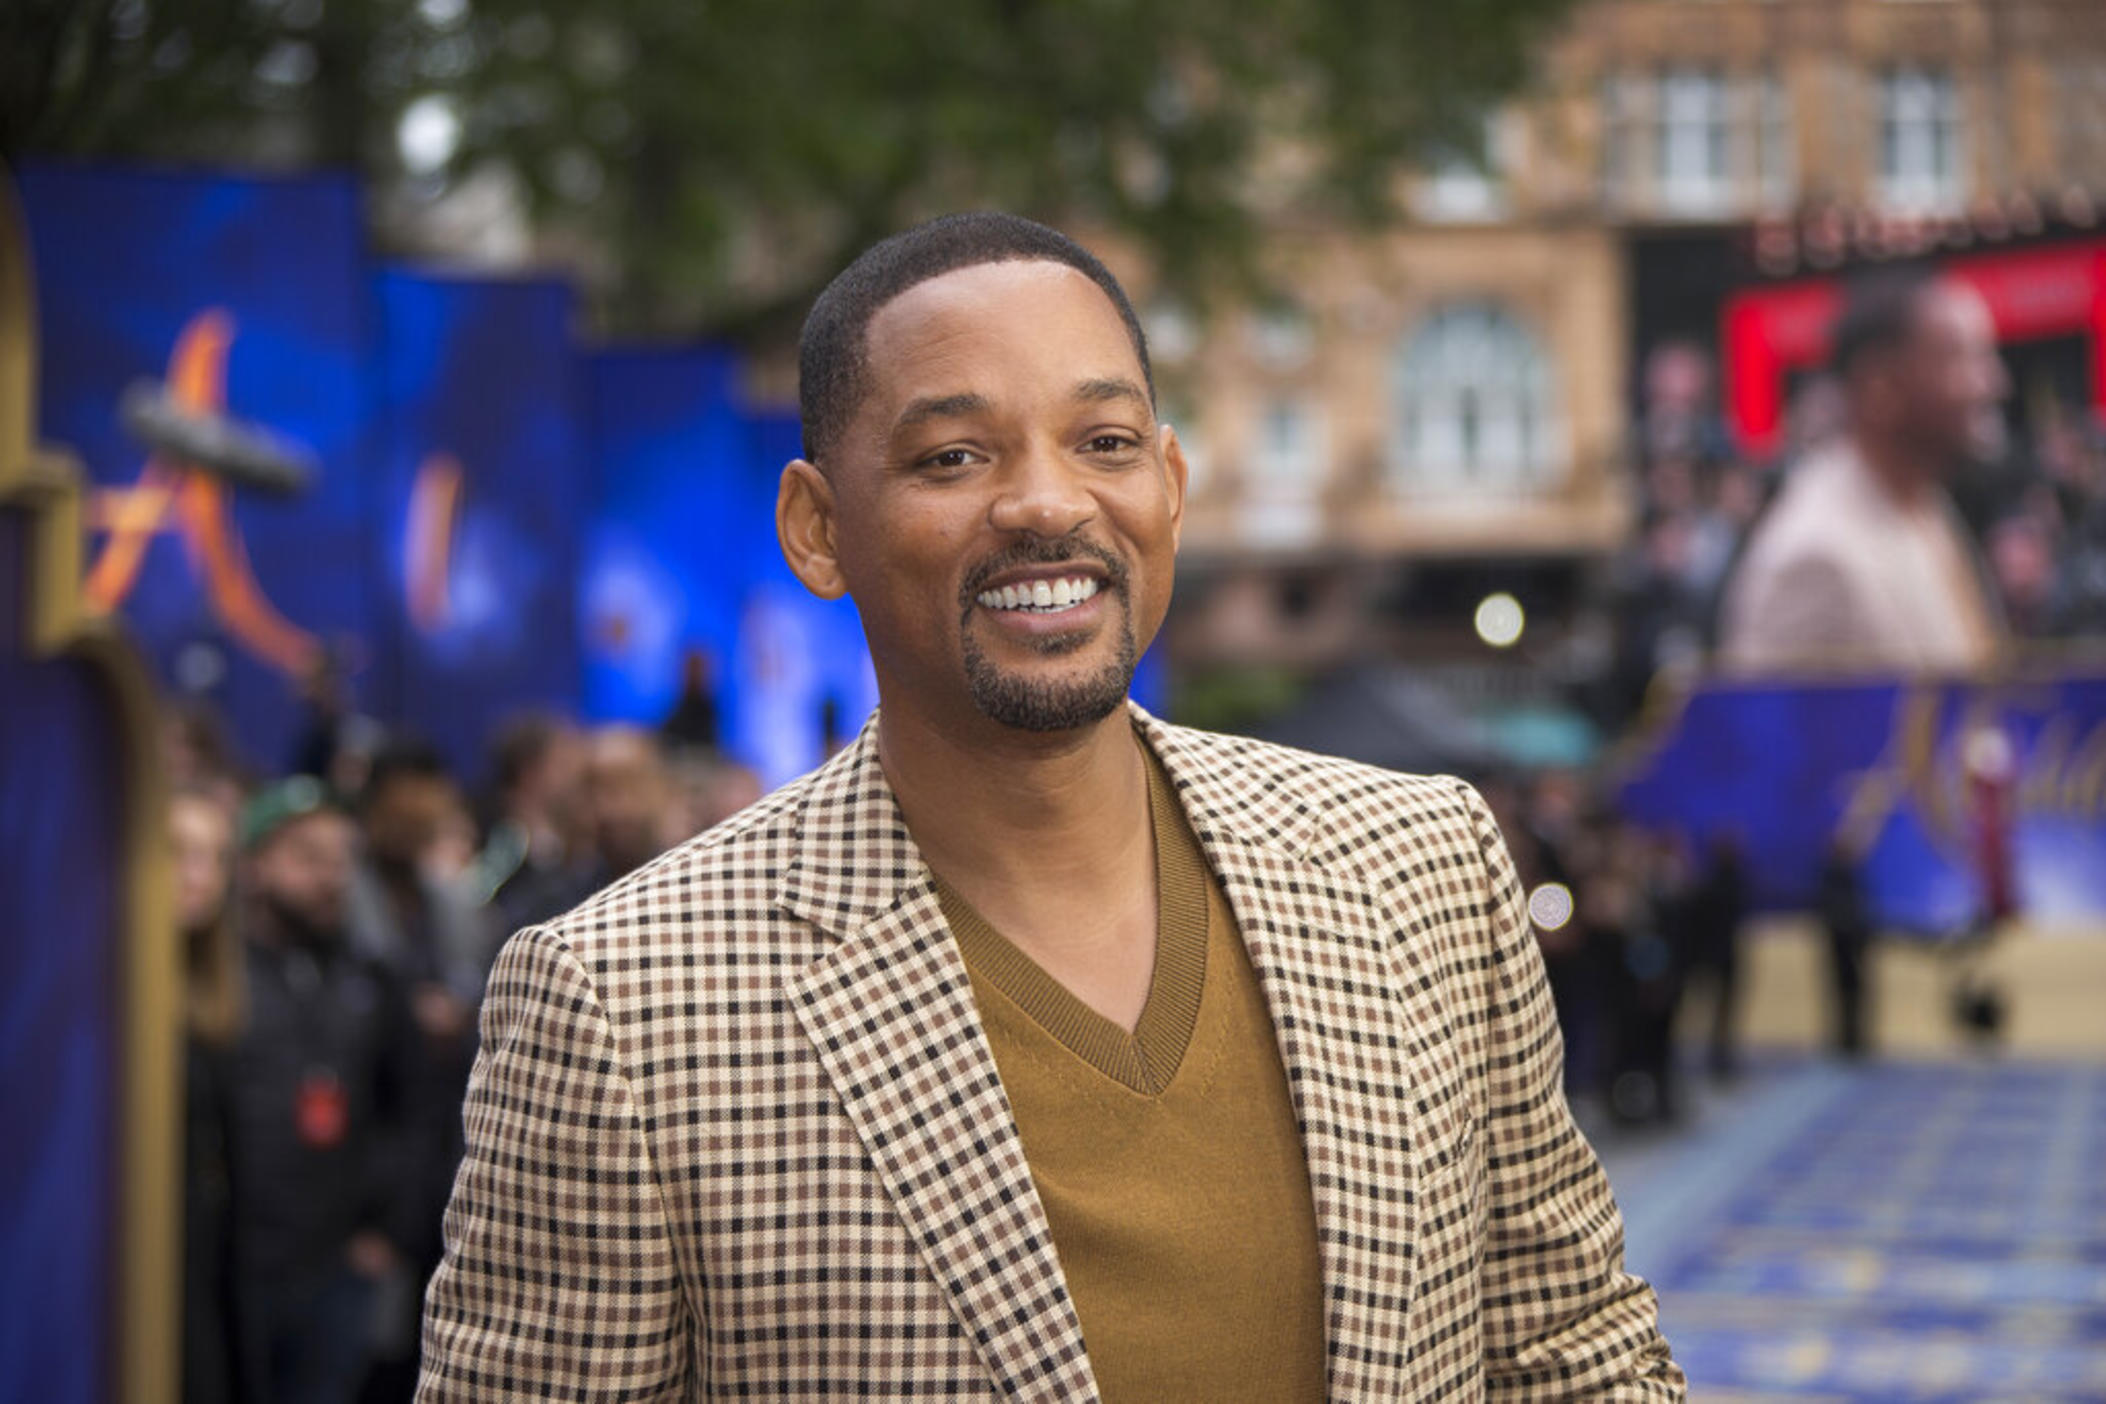 Will Smith and director Antoine Fuqua have pulled production of their runaway slave drama “Emancipation” from Georgia over the state’s recently enacted law restricting voting access. (Photo by Joel C Ryan/Invision/AP)